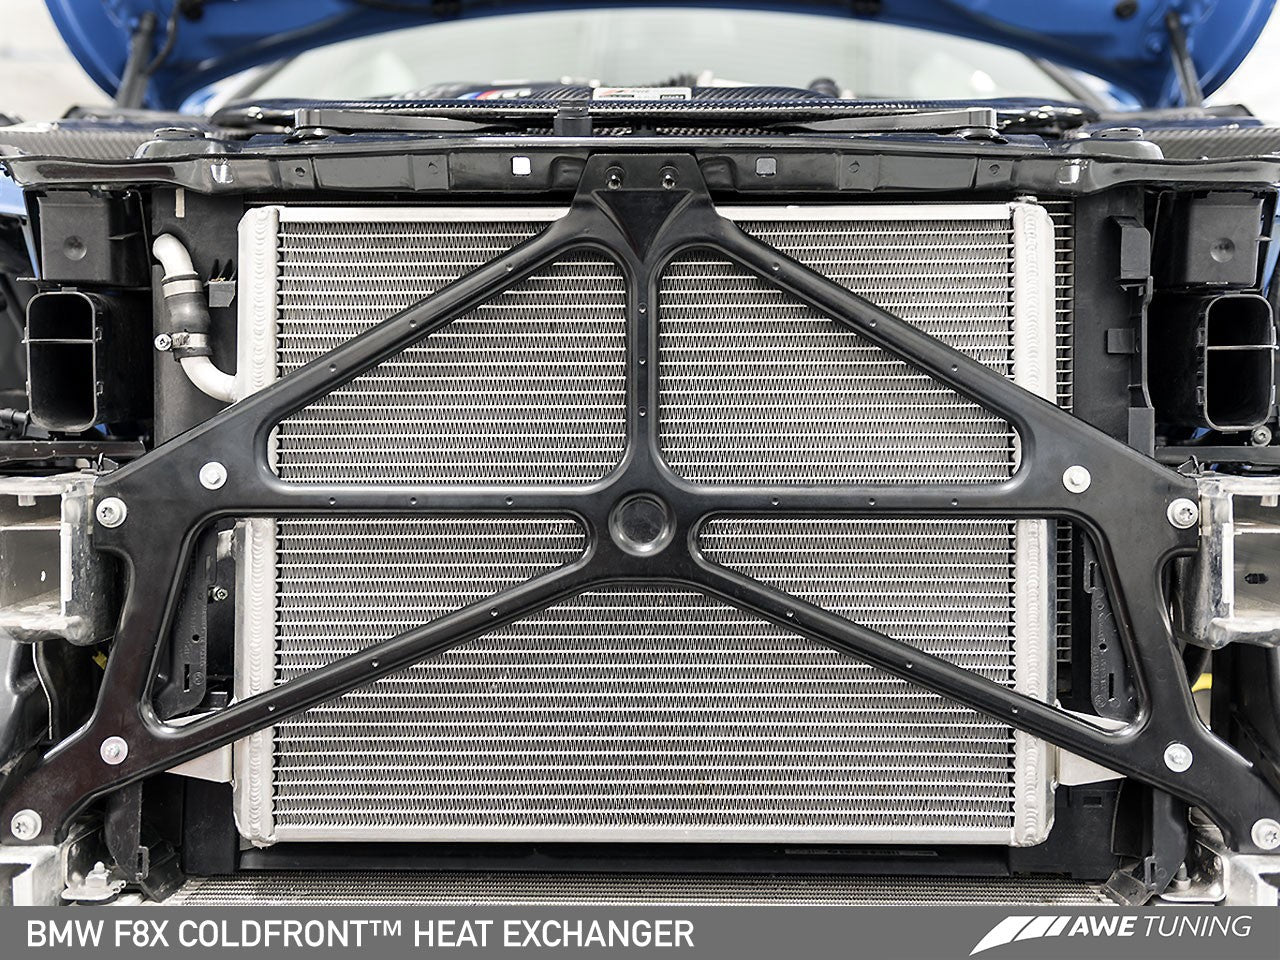 AWE ColdFront Heat Exchanger for BMW F8X M3 / M4